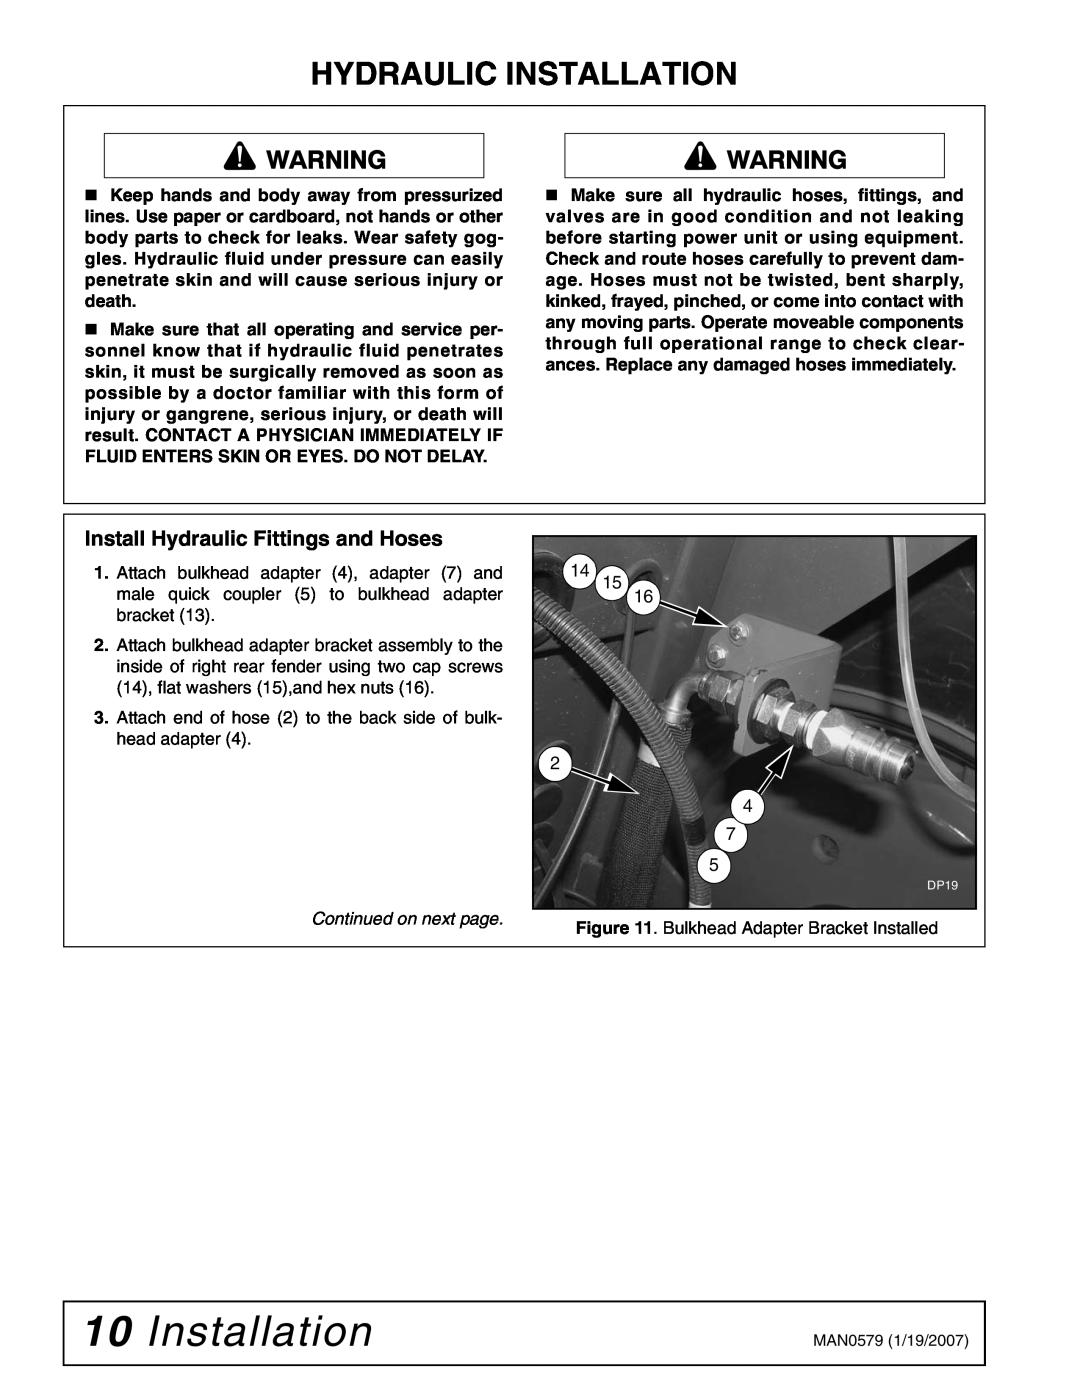 Woods Equipment 1023000 installation manual Installation, Install Hydraulic Fittings and Hoses, Continued on next page 